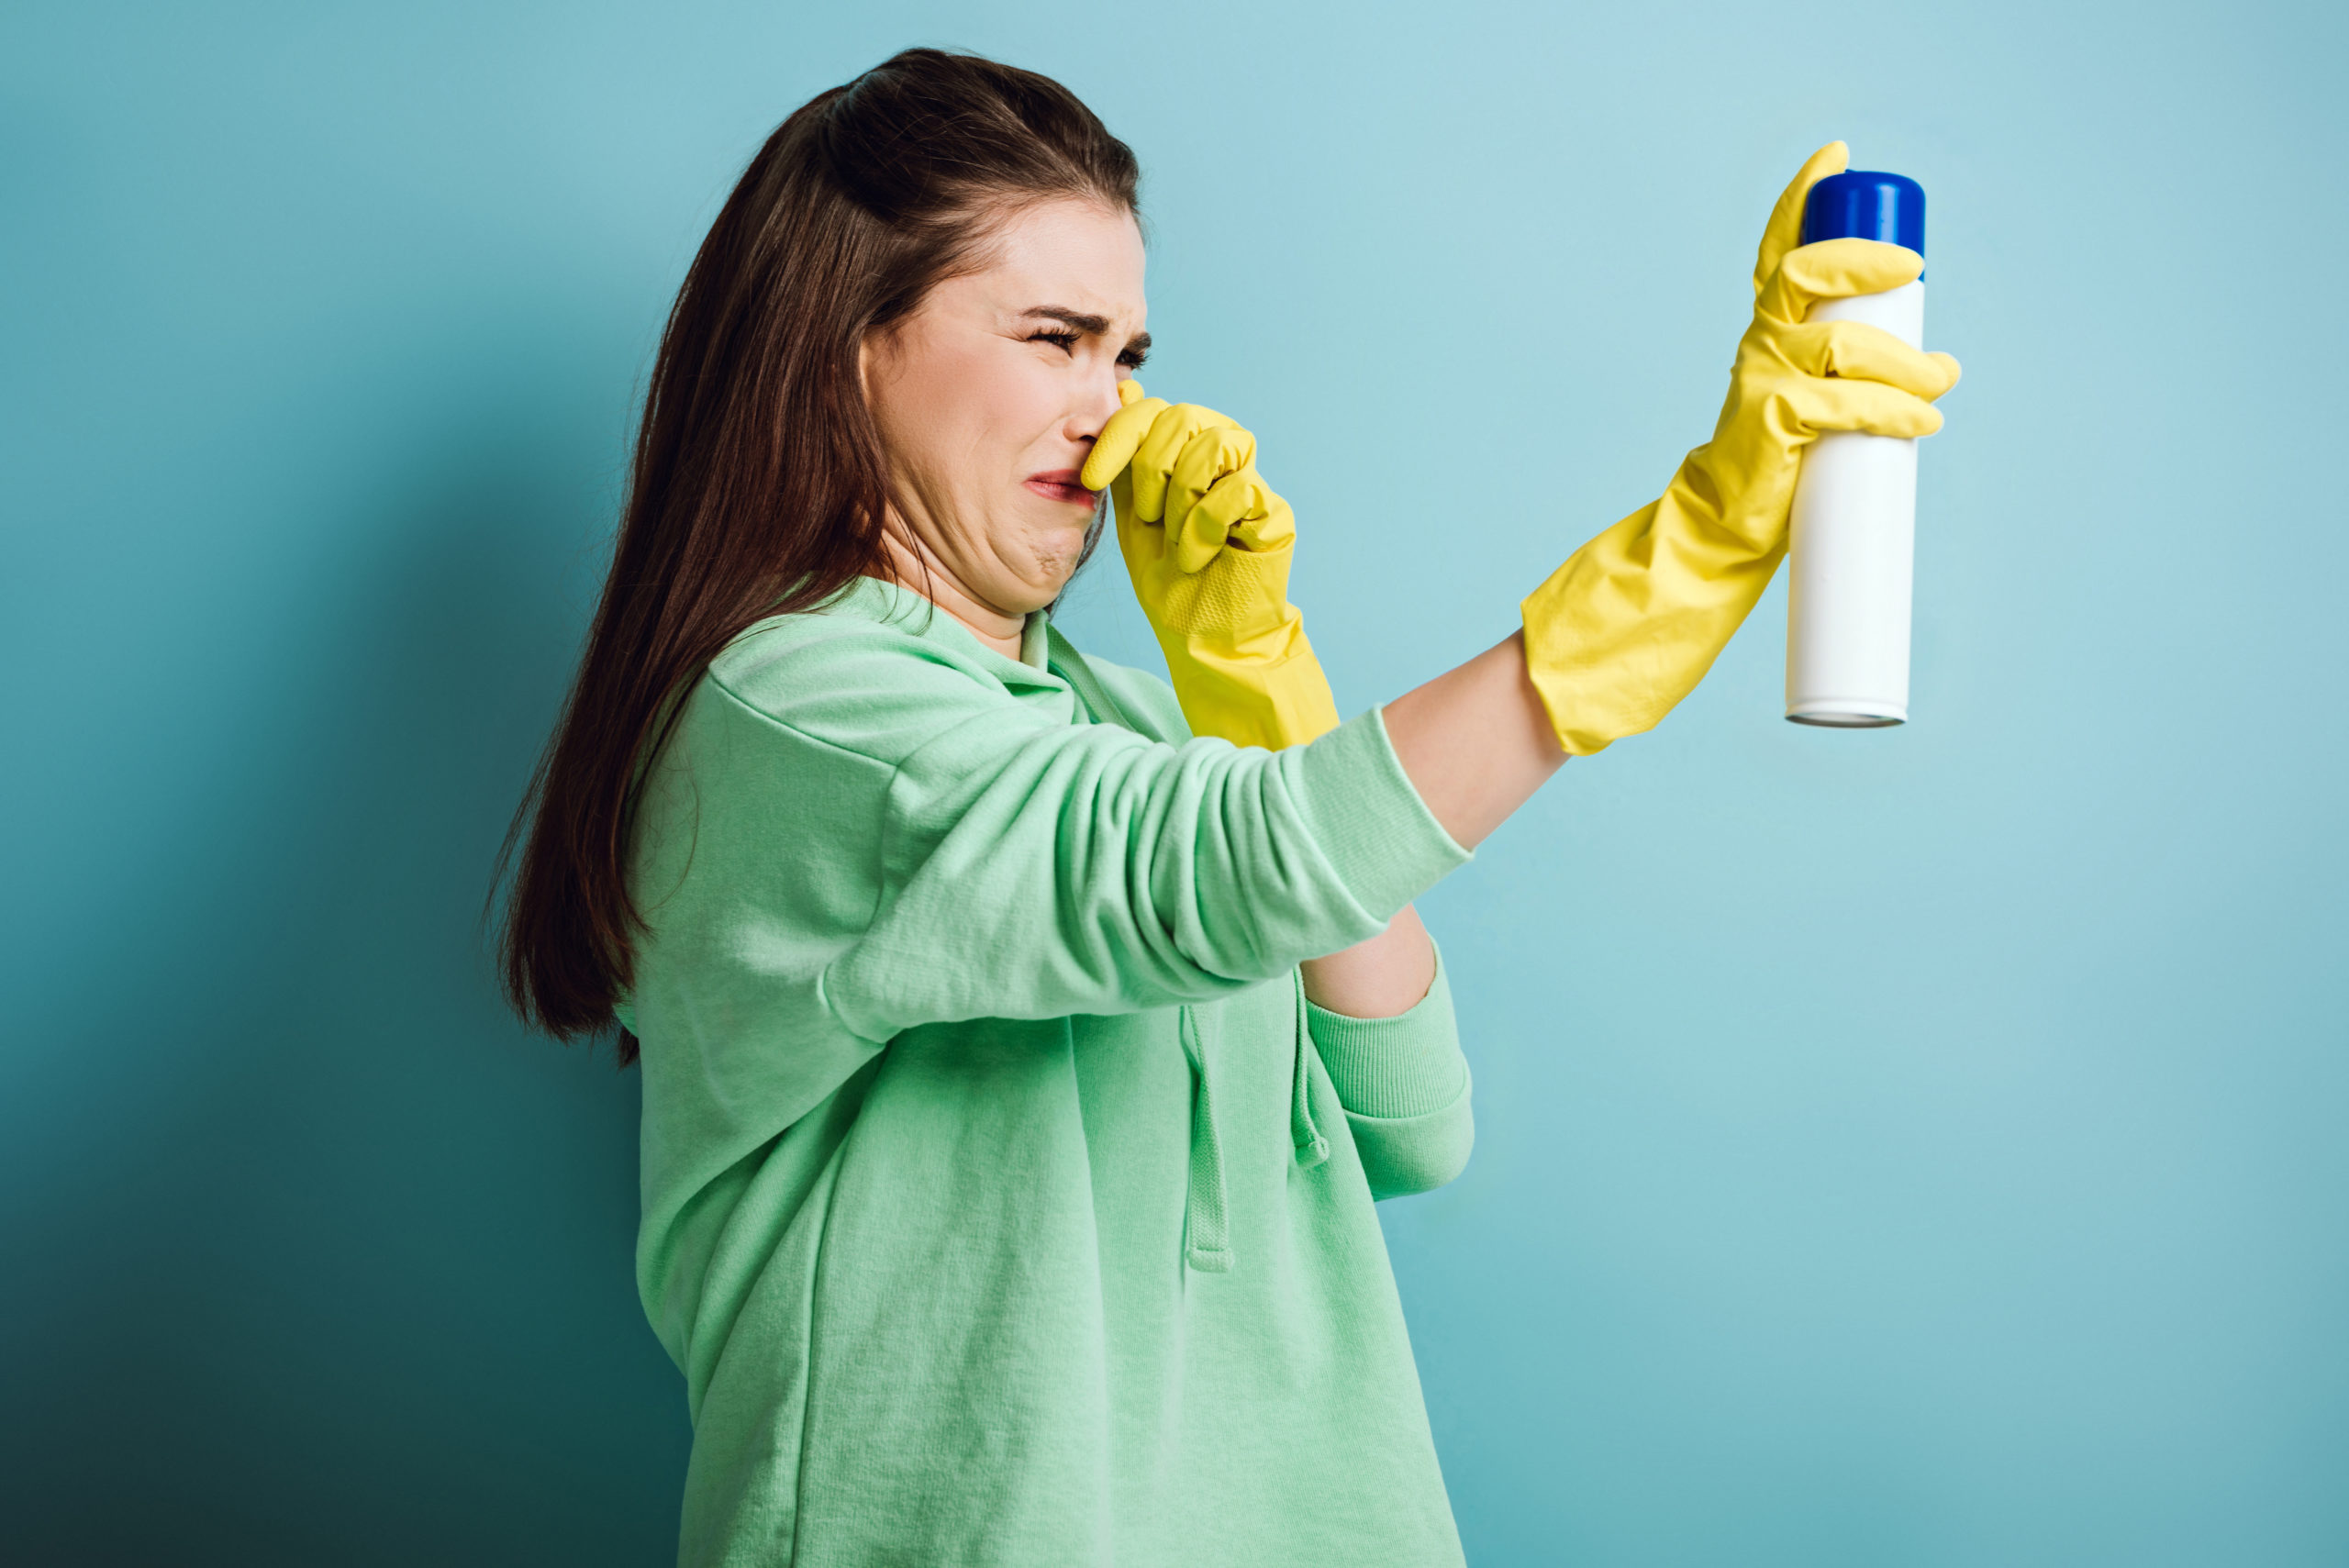 displeased housewife plugging nose with hand while spraying air freshener on blue background